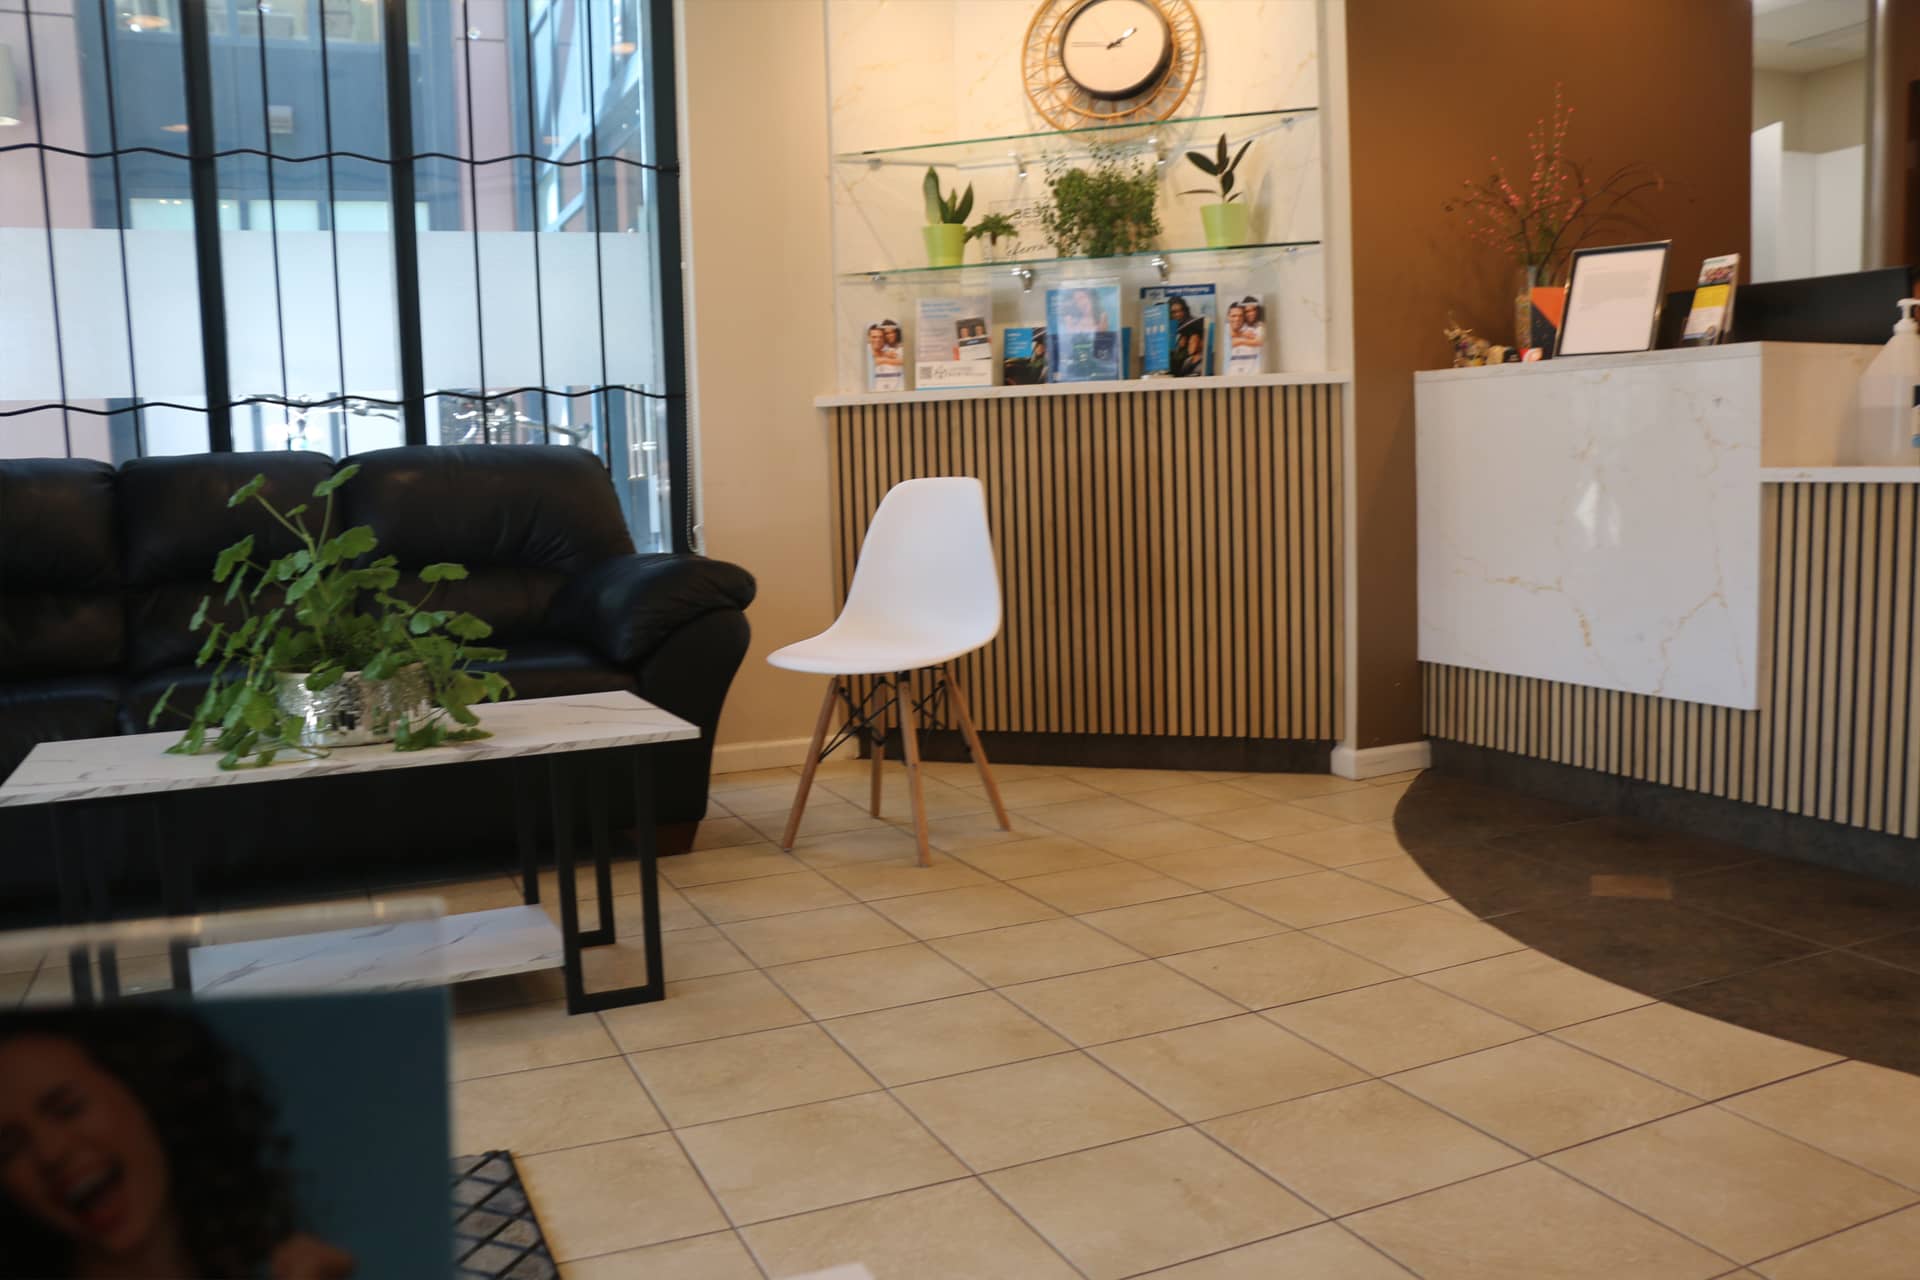 Receptionist area of Lighthouse Dental in Vancouver